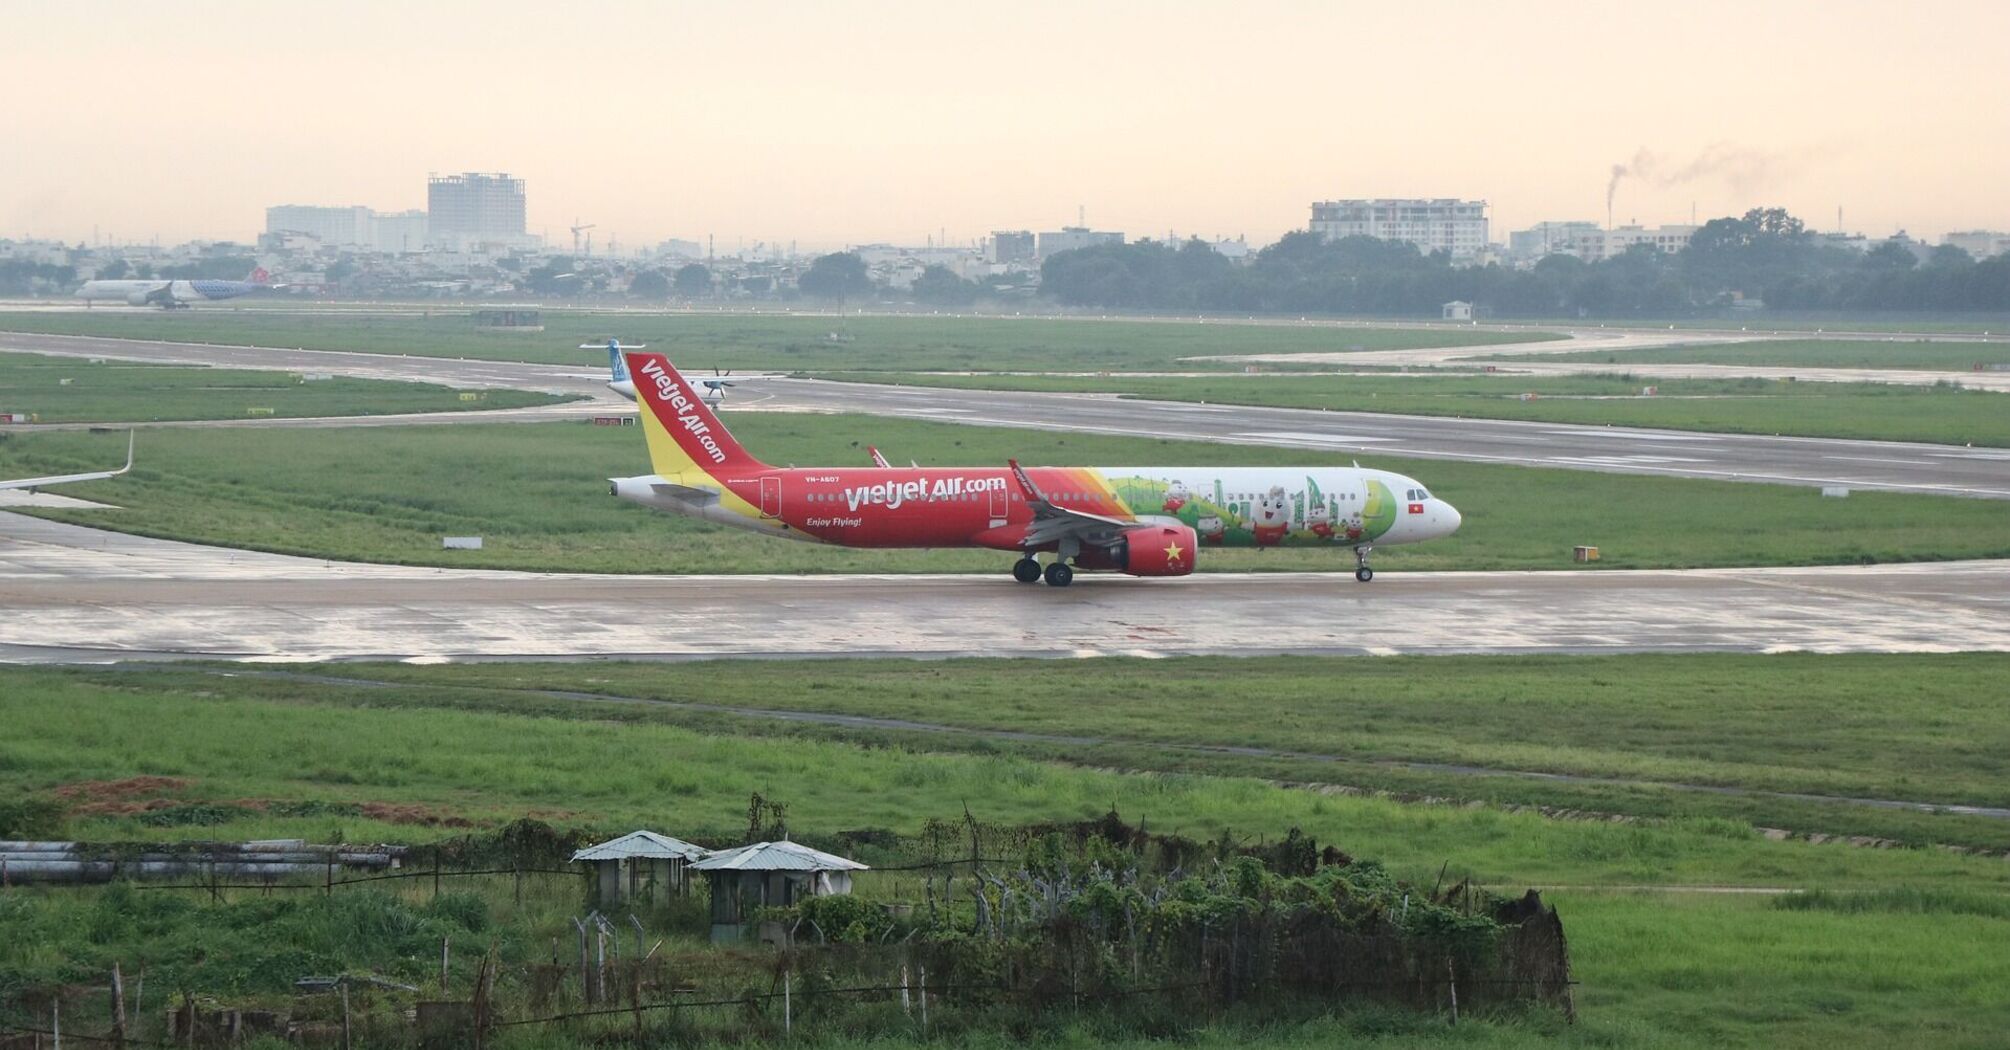 A Vietjet aircraft adorned with colorful decals, preparing for take-off on a runway with green fields and buildings in the background 